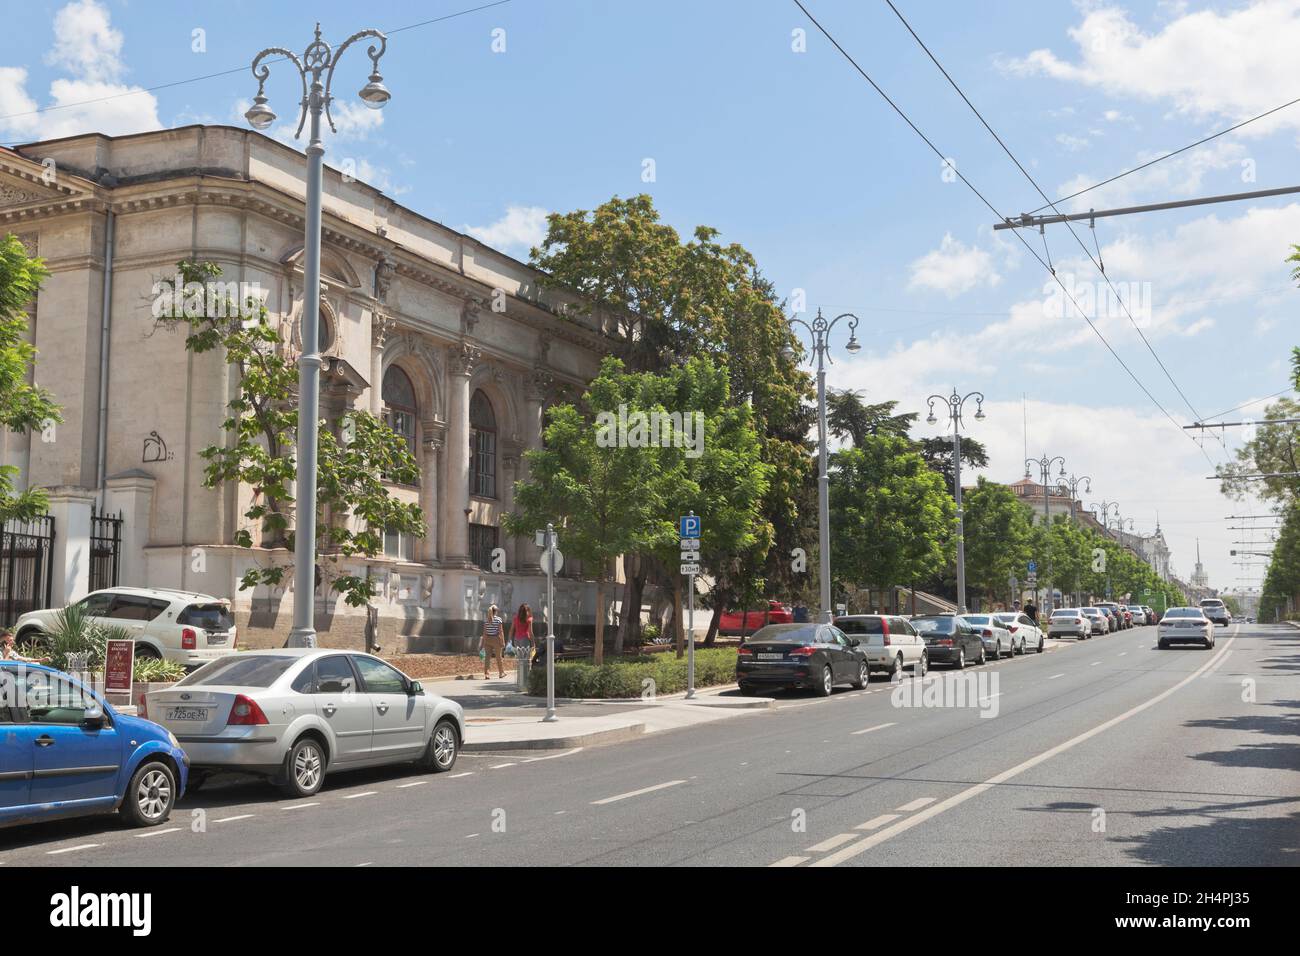 Sevastopol, Crimea, Russia - July 29, 2020: Bolshaya Morskaya street house 11 'Sports school of the Olympic reserve number 4 in boxing' in the city of Stock Photo